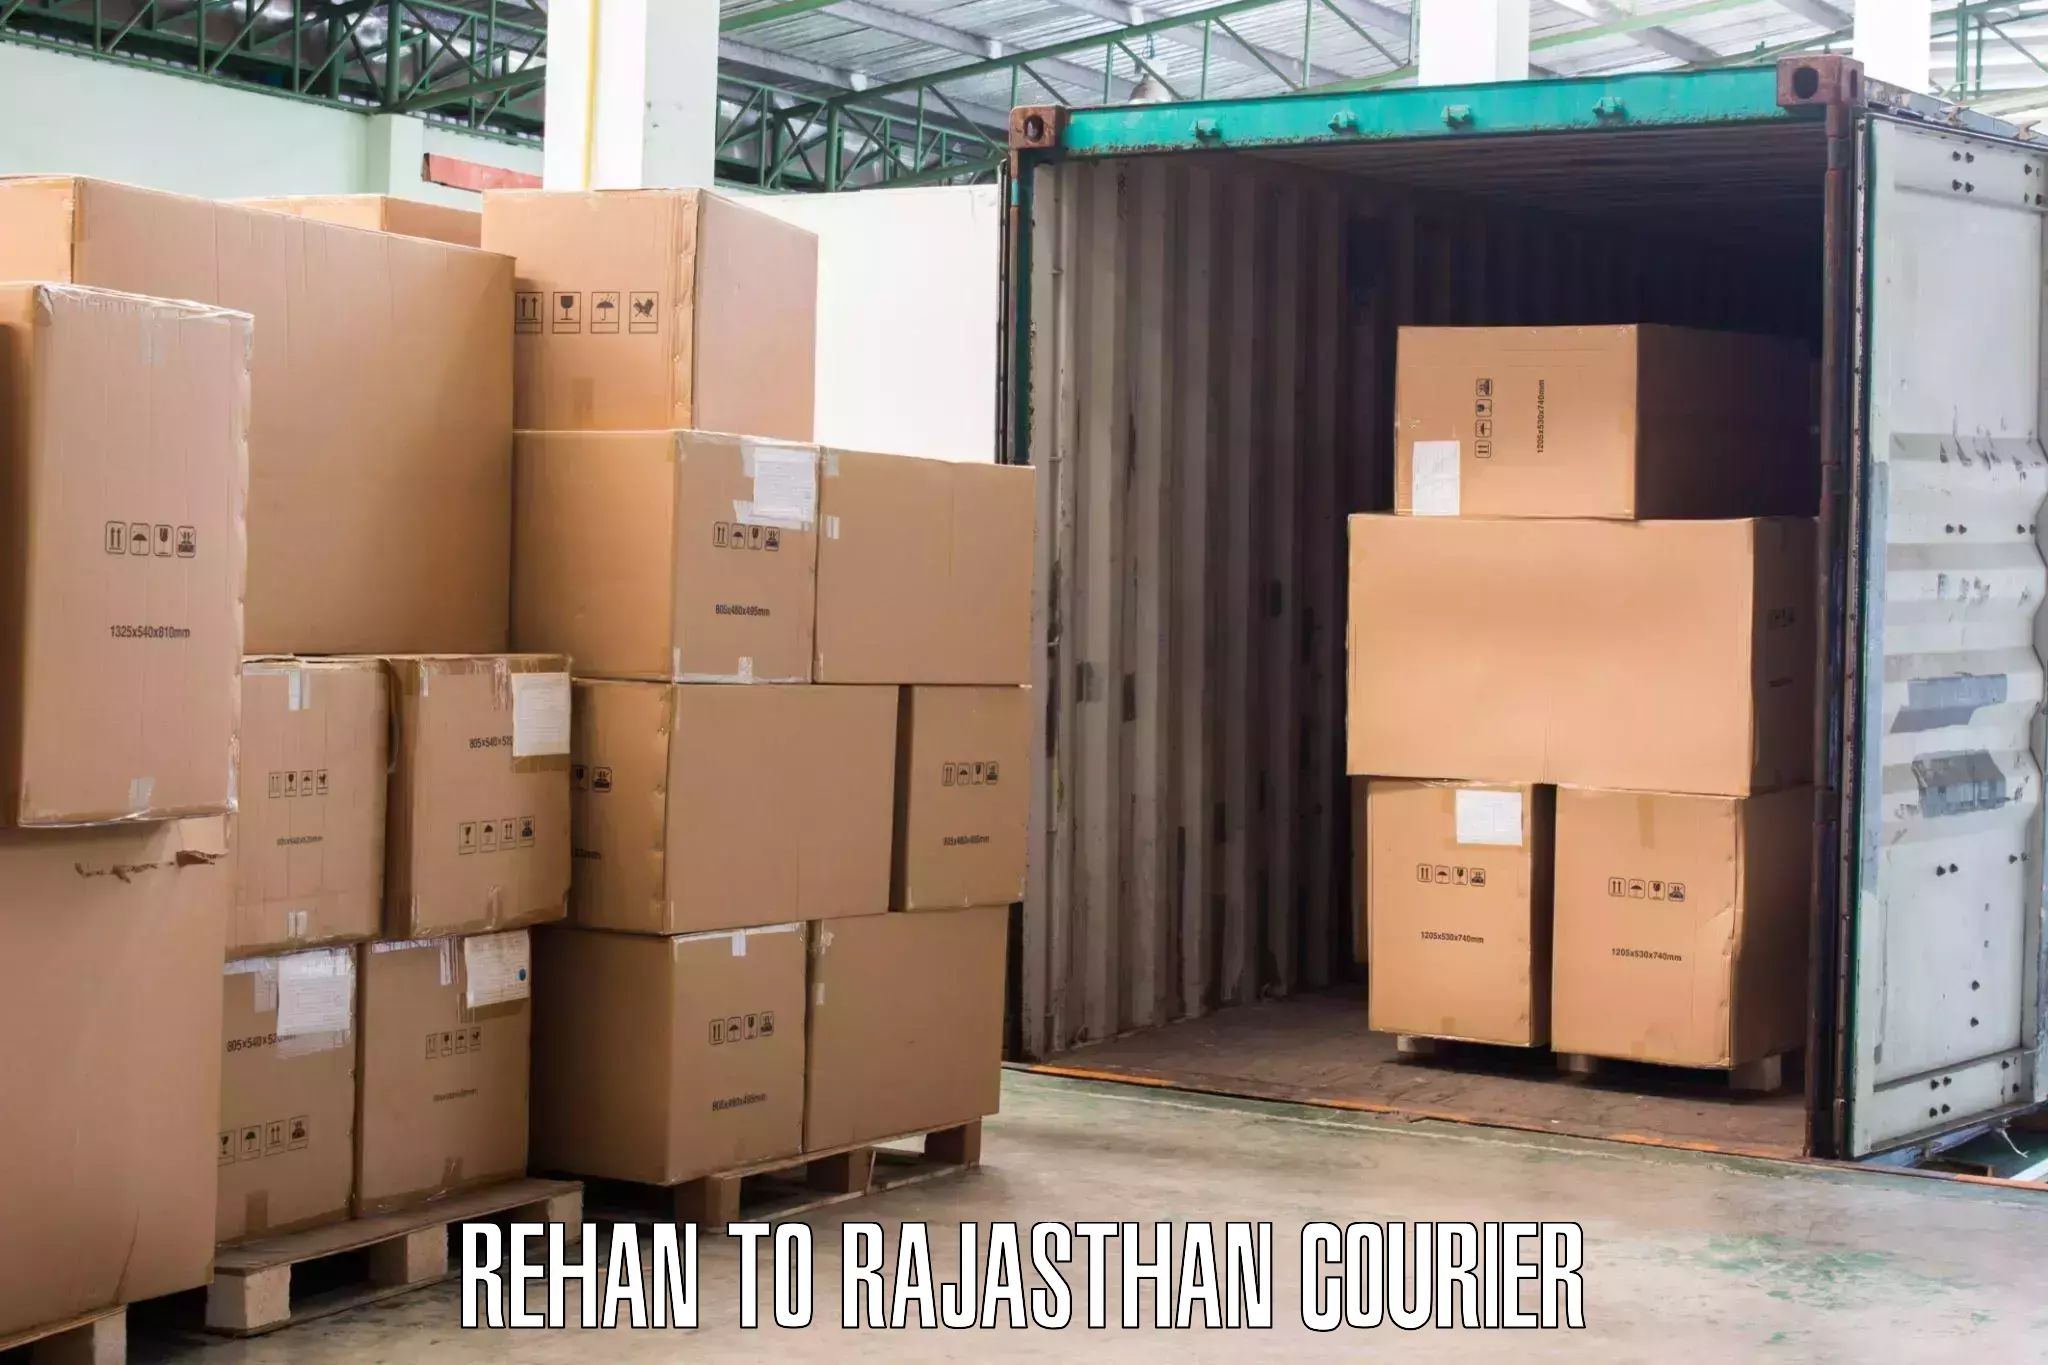 Residential furniture movers Rehan to Suratgarh